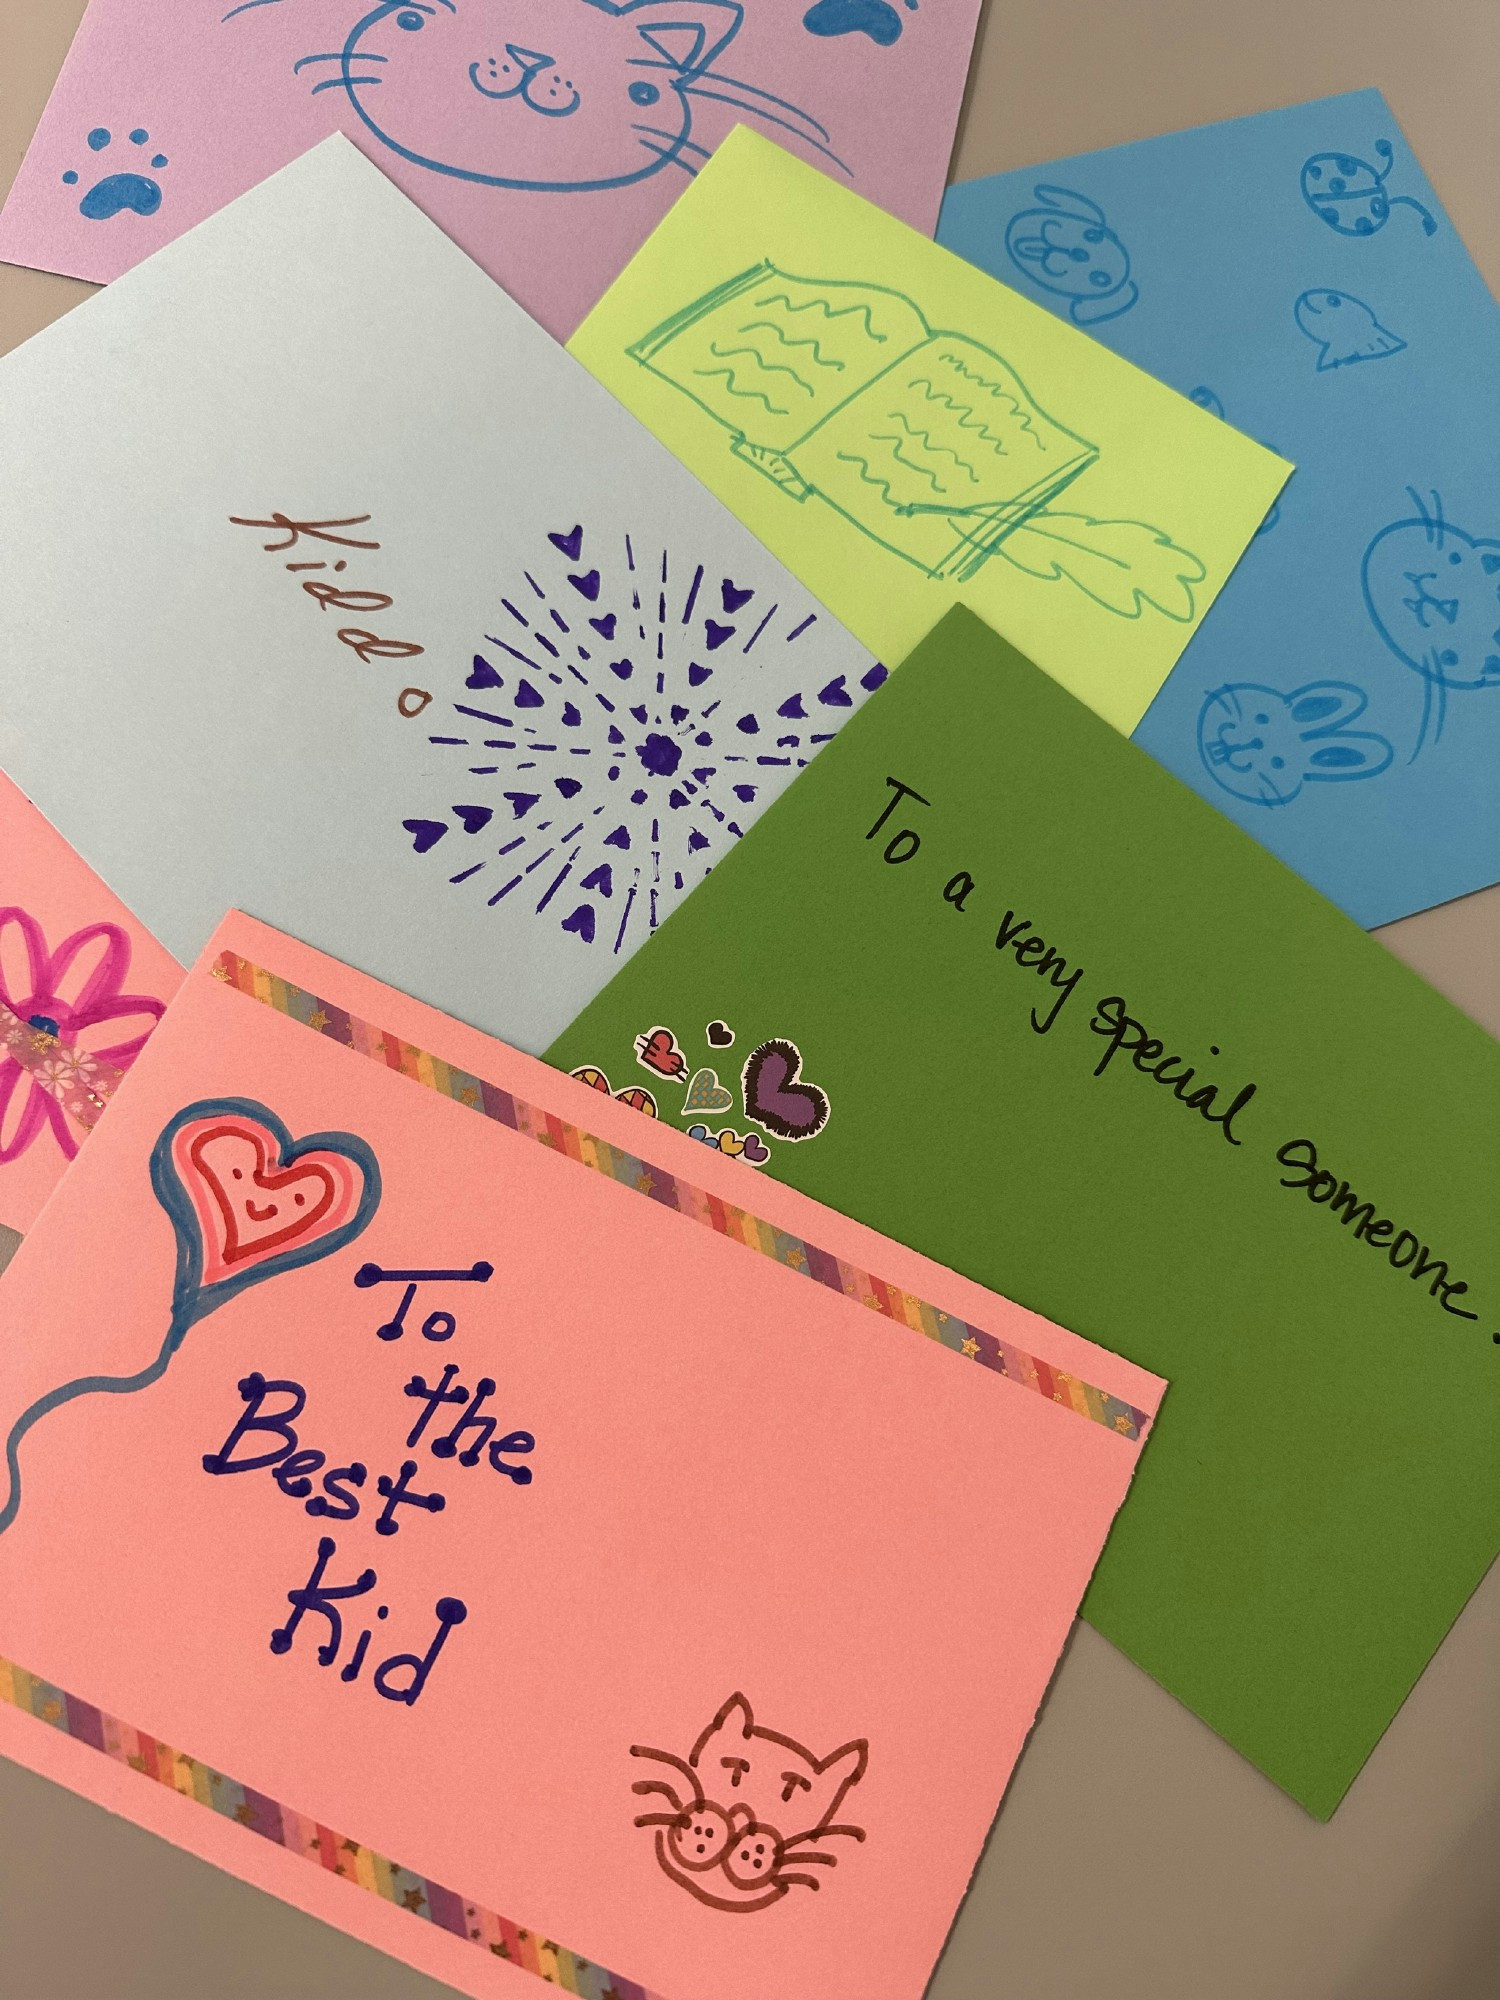 NBME invites Staff to write to children in foster care through Letters to Foster Children during an all staff event.